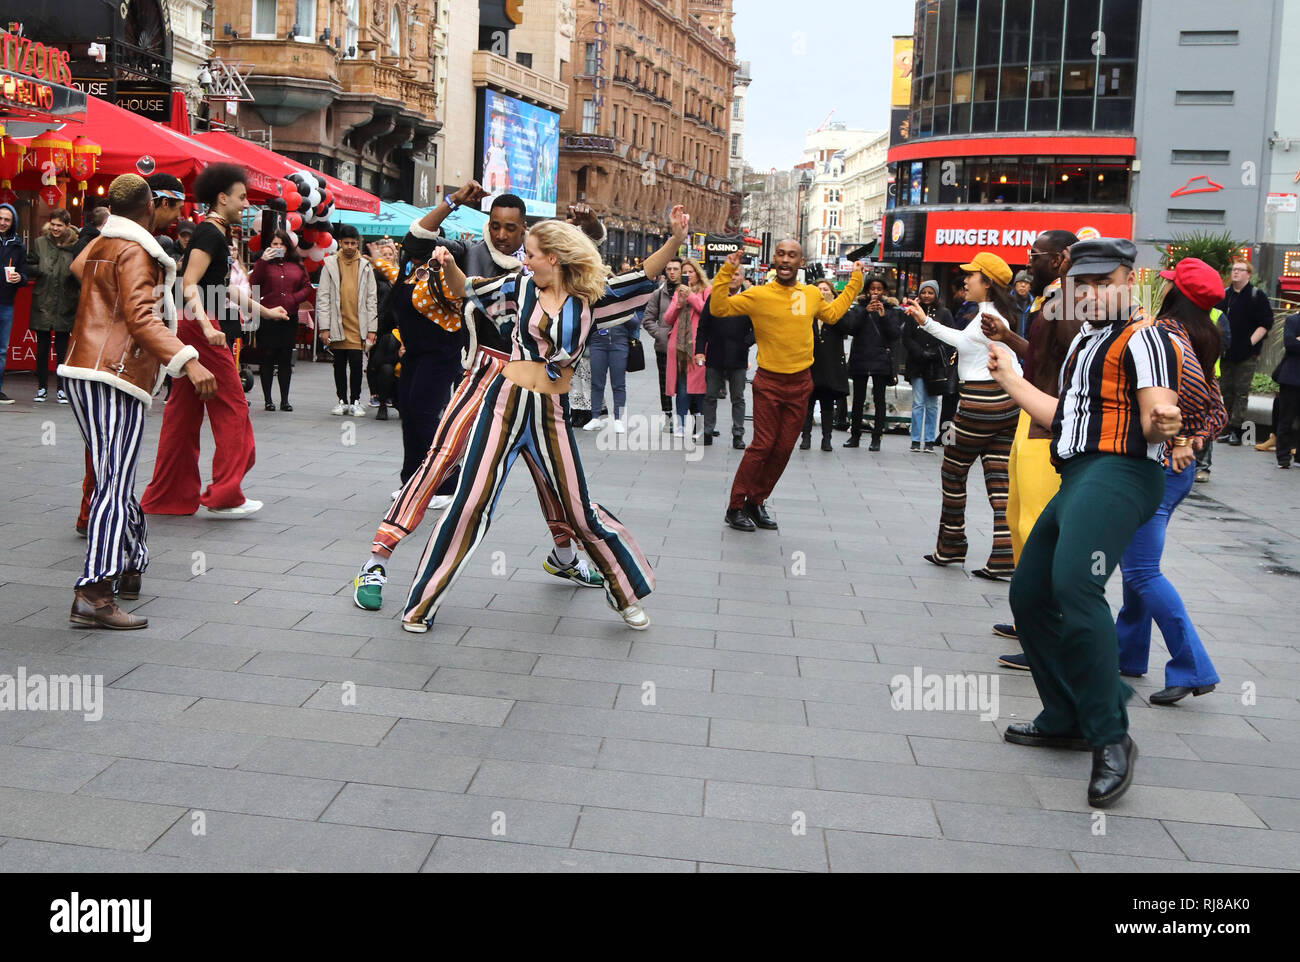 The American Soul crew seen dancing together in the streets of London. In honour of the BET (Black Entertainment Television) Network’s groovy new period drama, American Soul, a flash mob dance take-over on the streets of London. Stock Photo